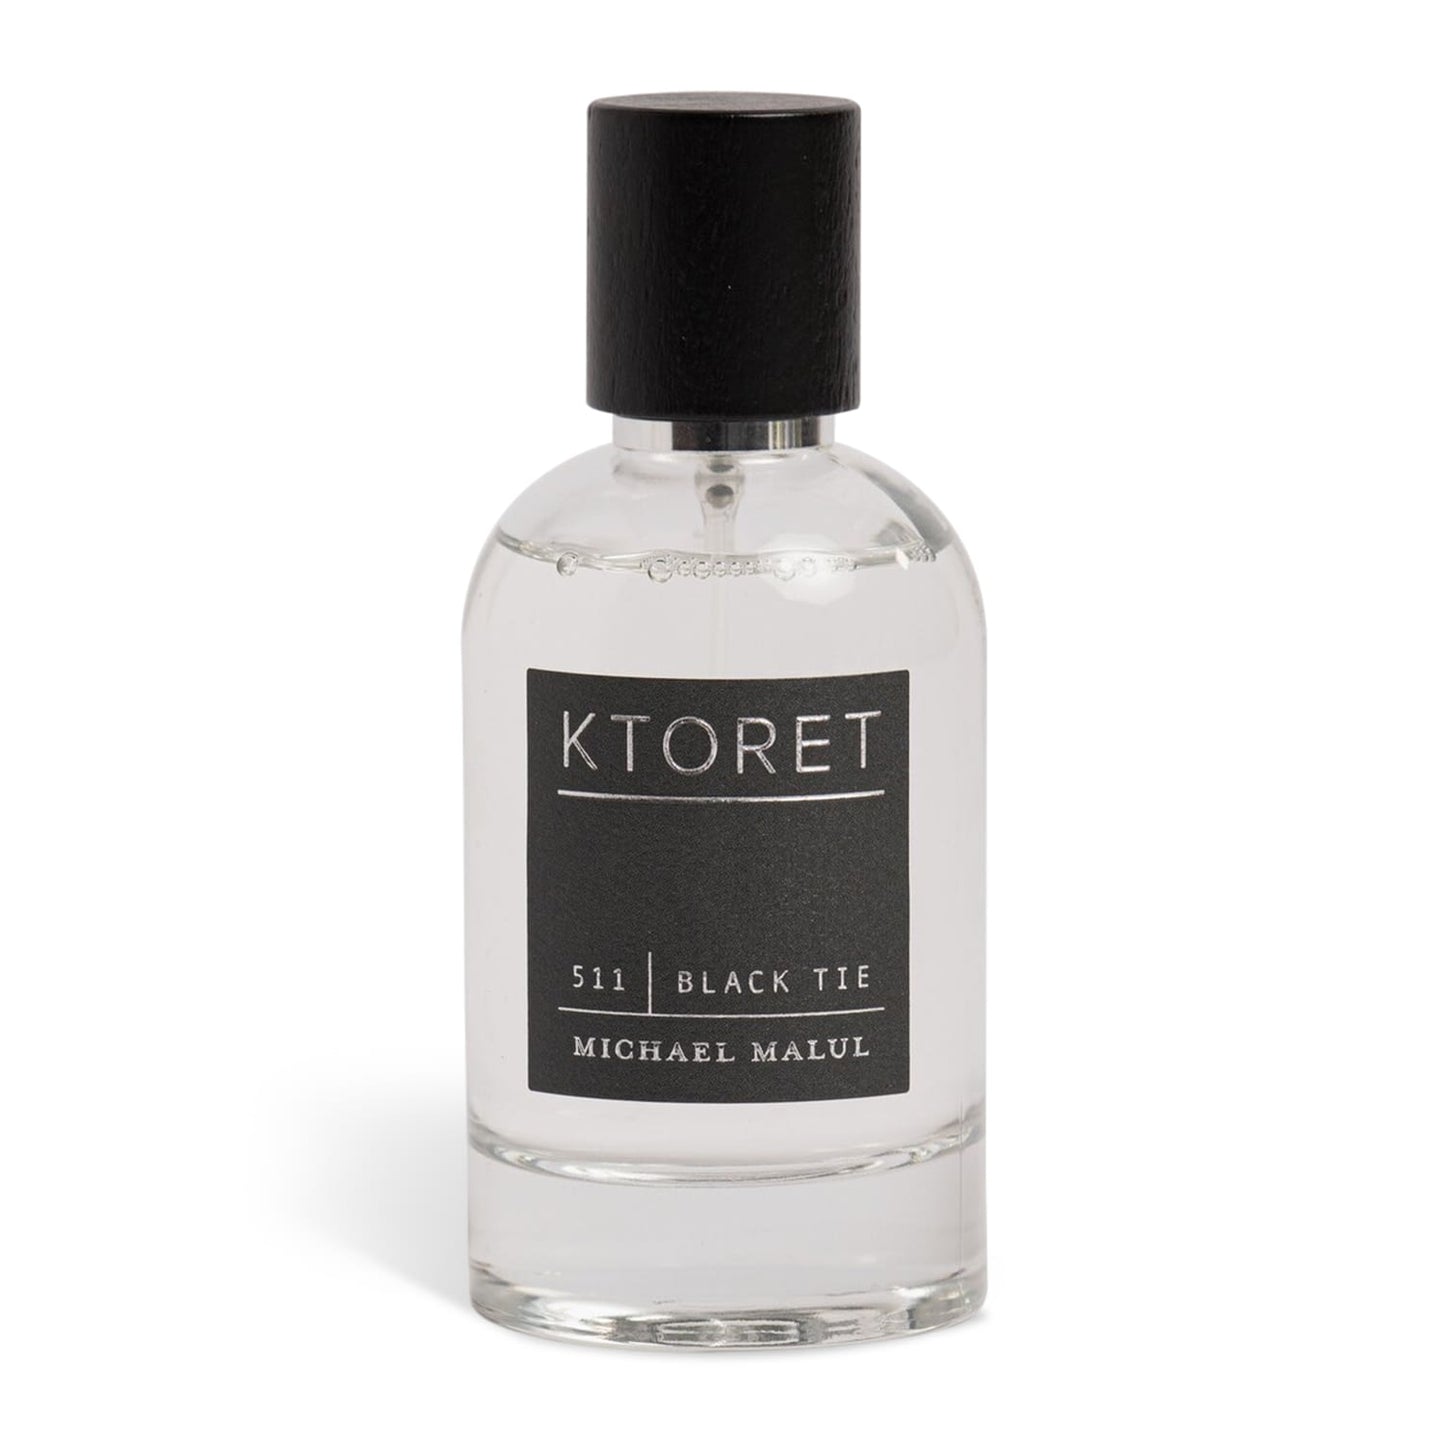 KTORET 511 Black Tie By Michael Malul - Scent In The City - Perfume & Cologne